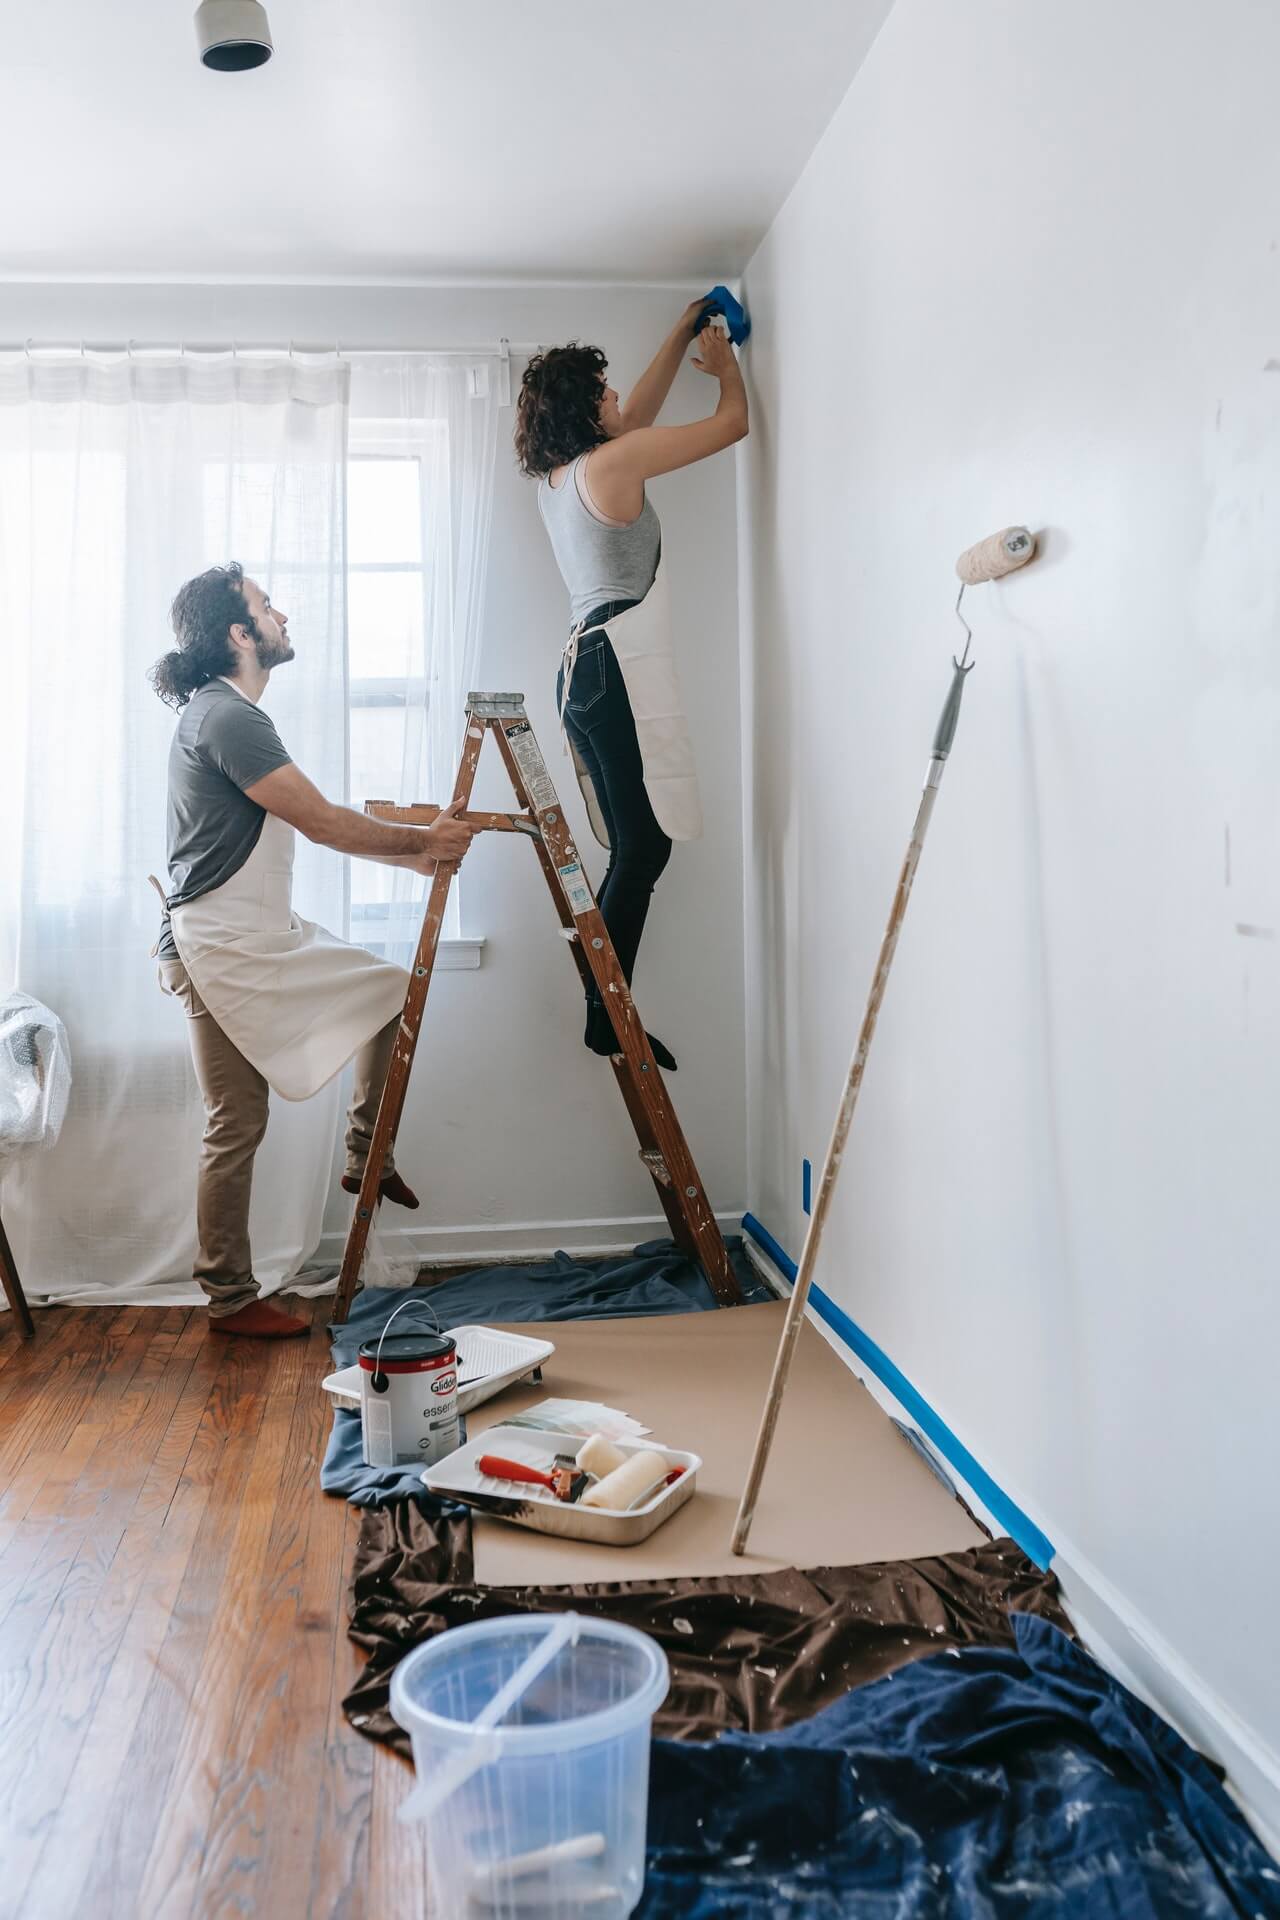 How Can I Tell If I Should Tackle a Remodeling Project Myself?